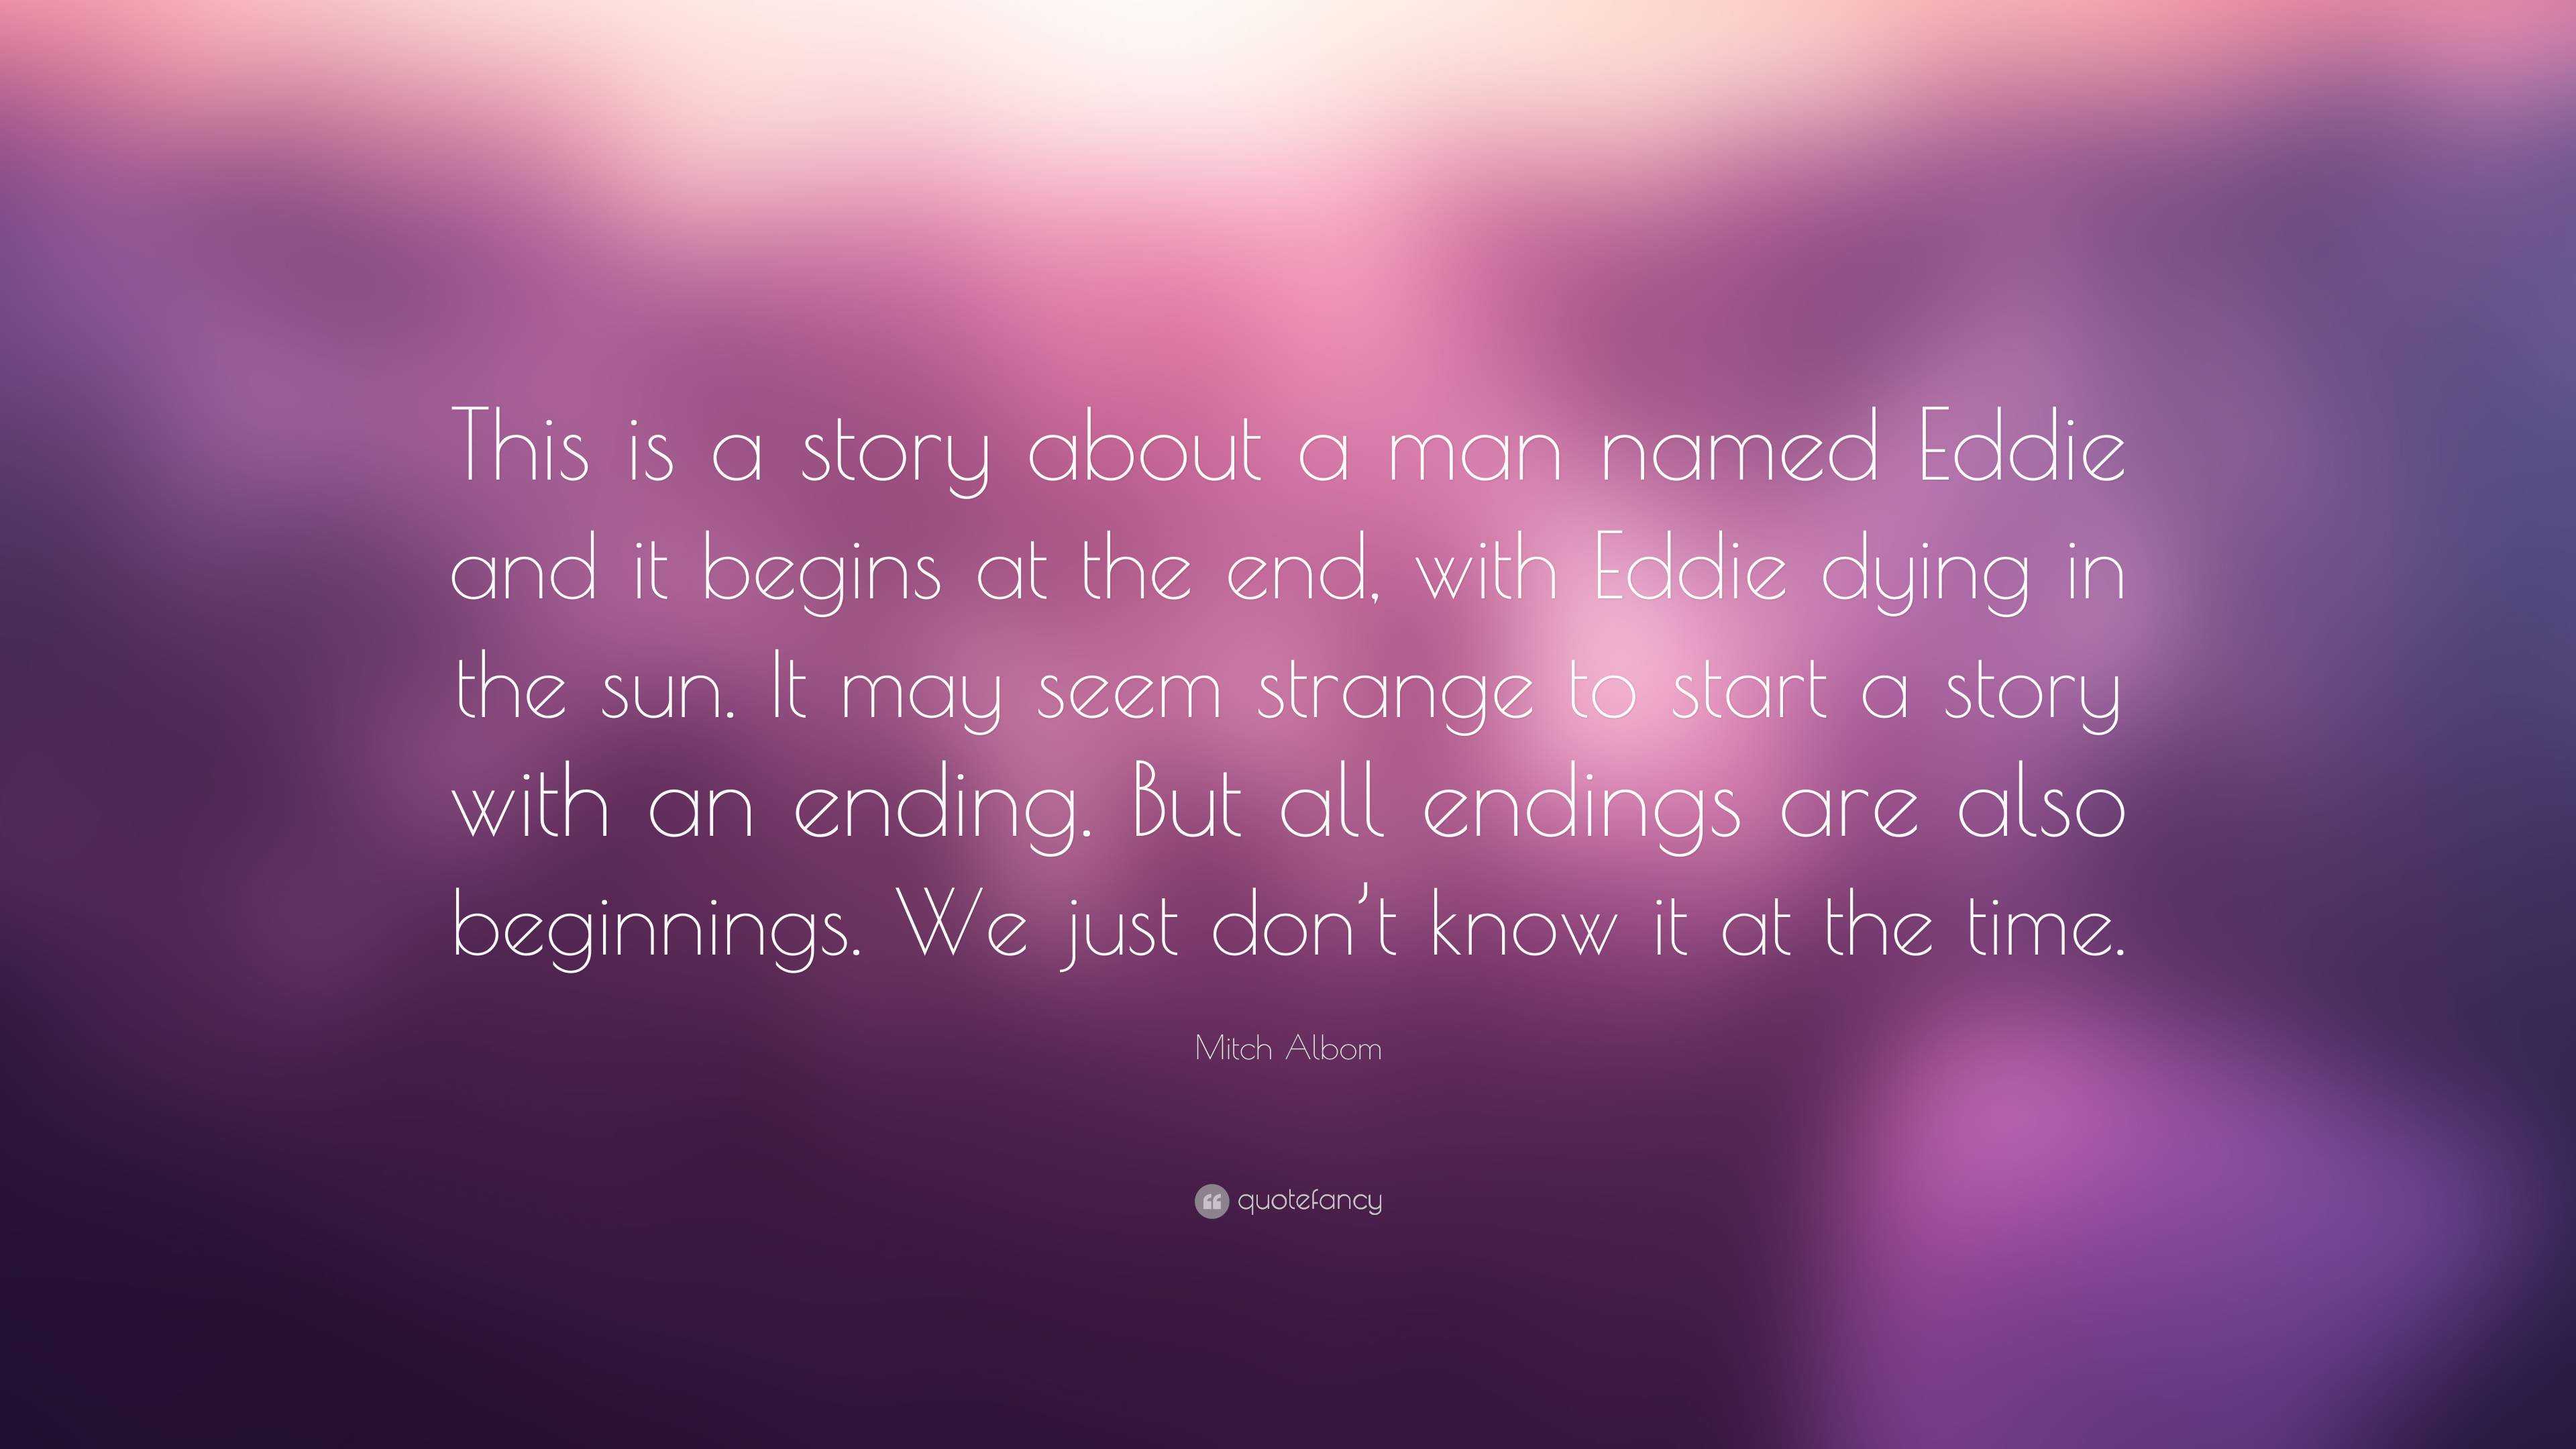 Mitch Albom Quote: “This is a story about a man named Eddie and it ...